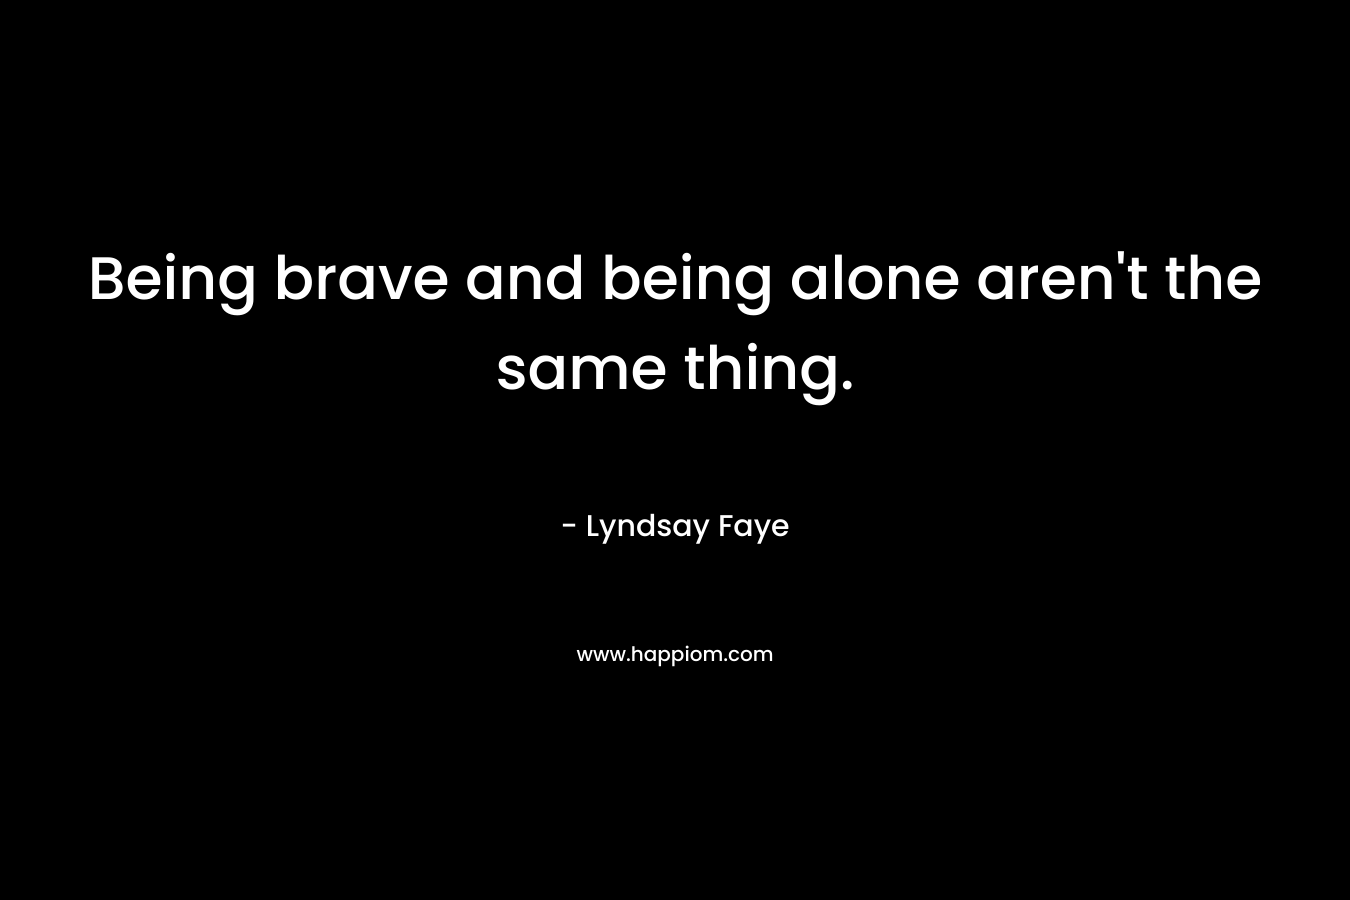 Being brave and being alone aren’t the same thing. – Lyndsay Faye